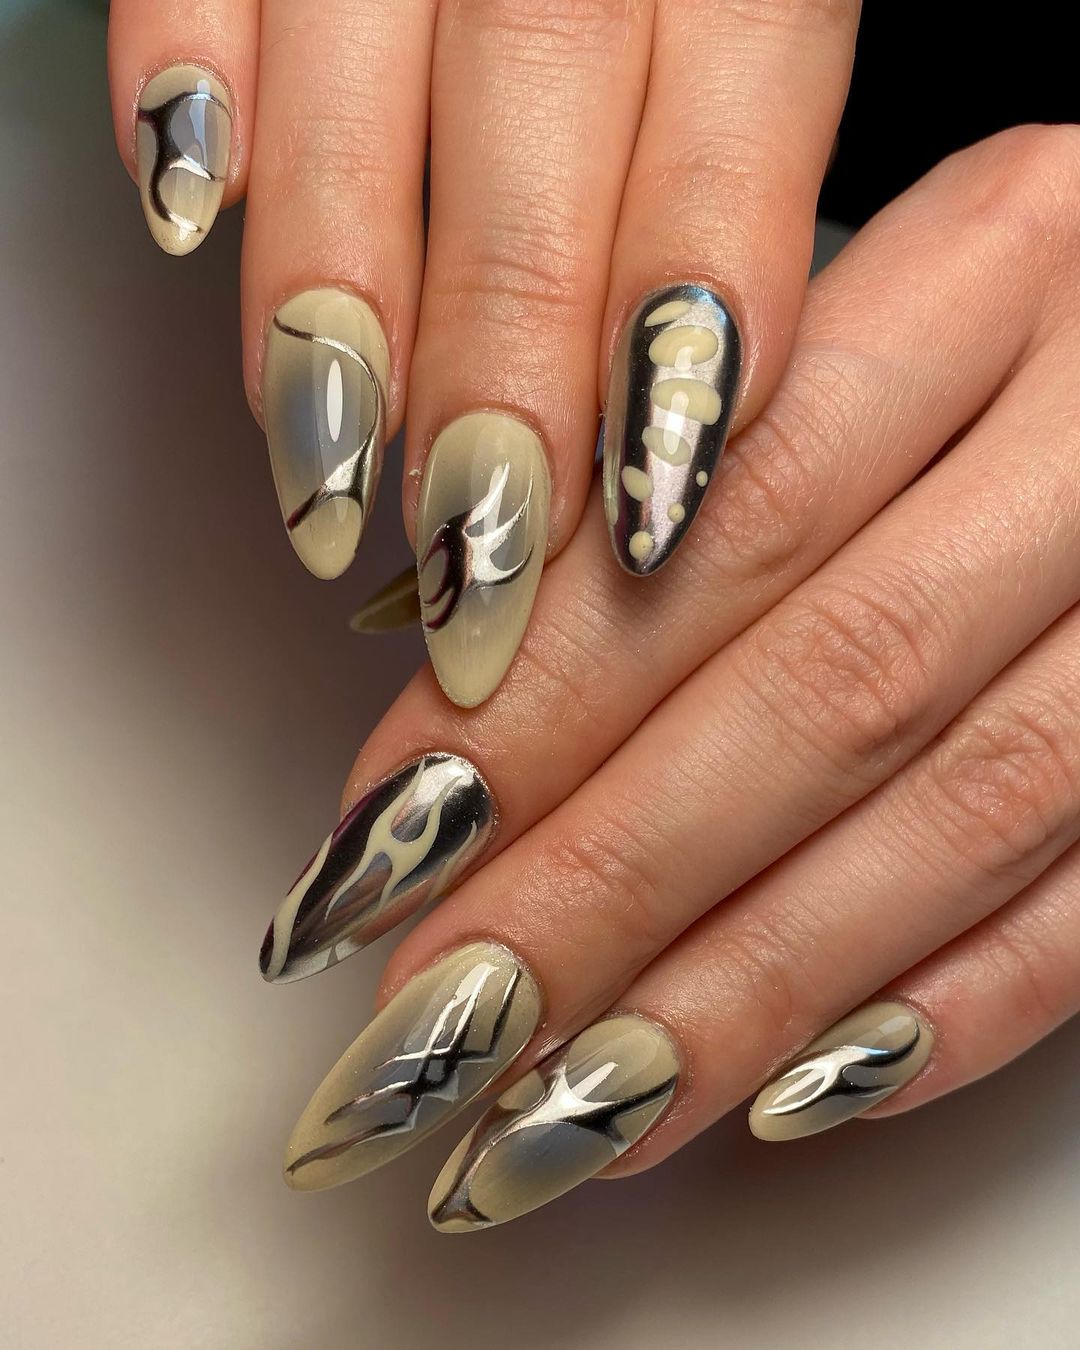 50 Best Nail Designs Trends To Try Out In 2022 images 3